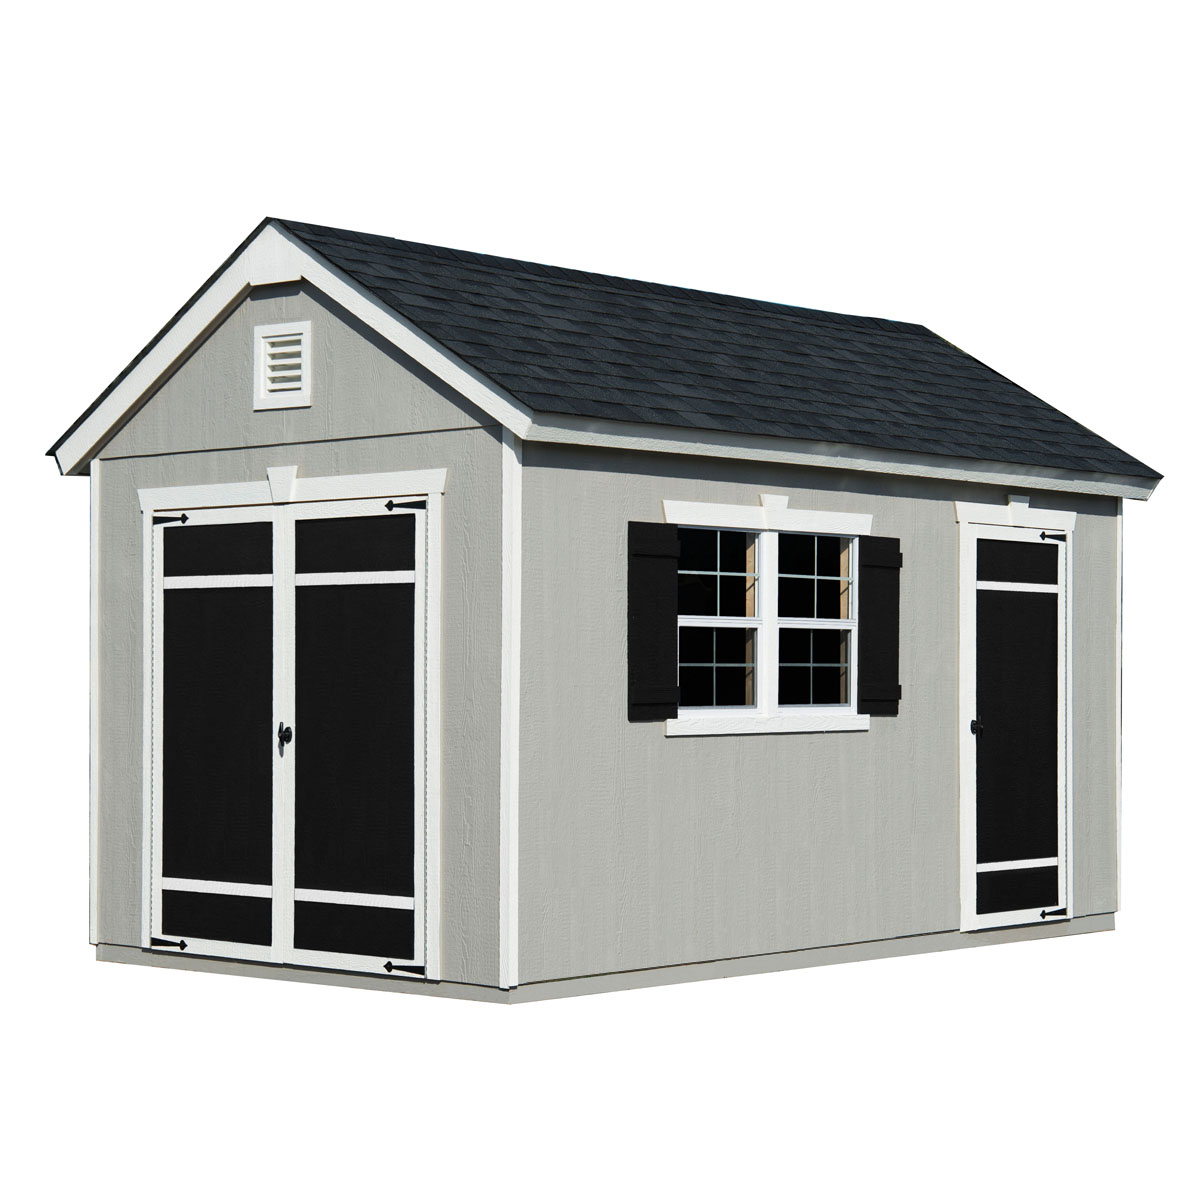 Wooden Backyard Shed For Storage Workshop 8x14 Montclair within sizing 1200 X 1200